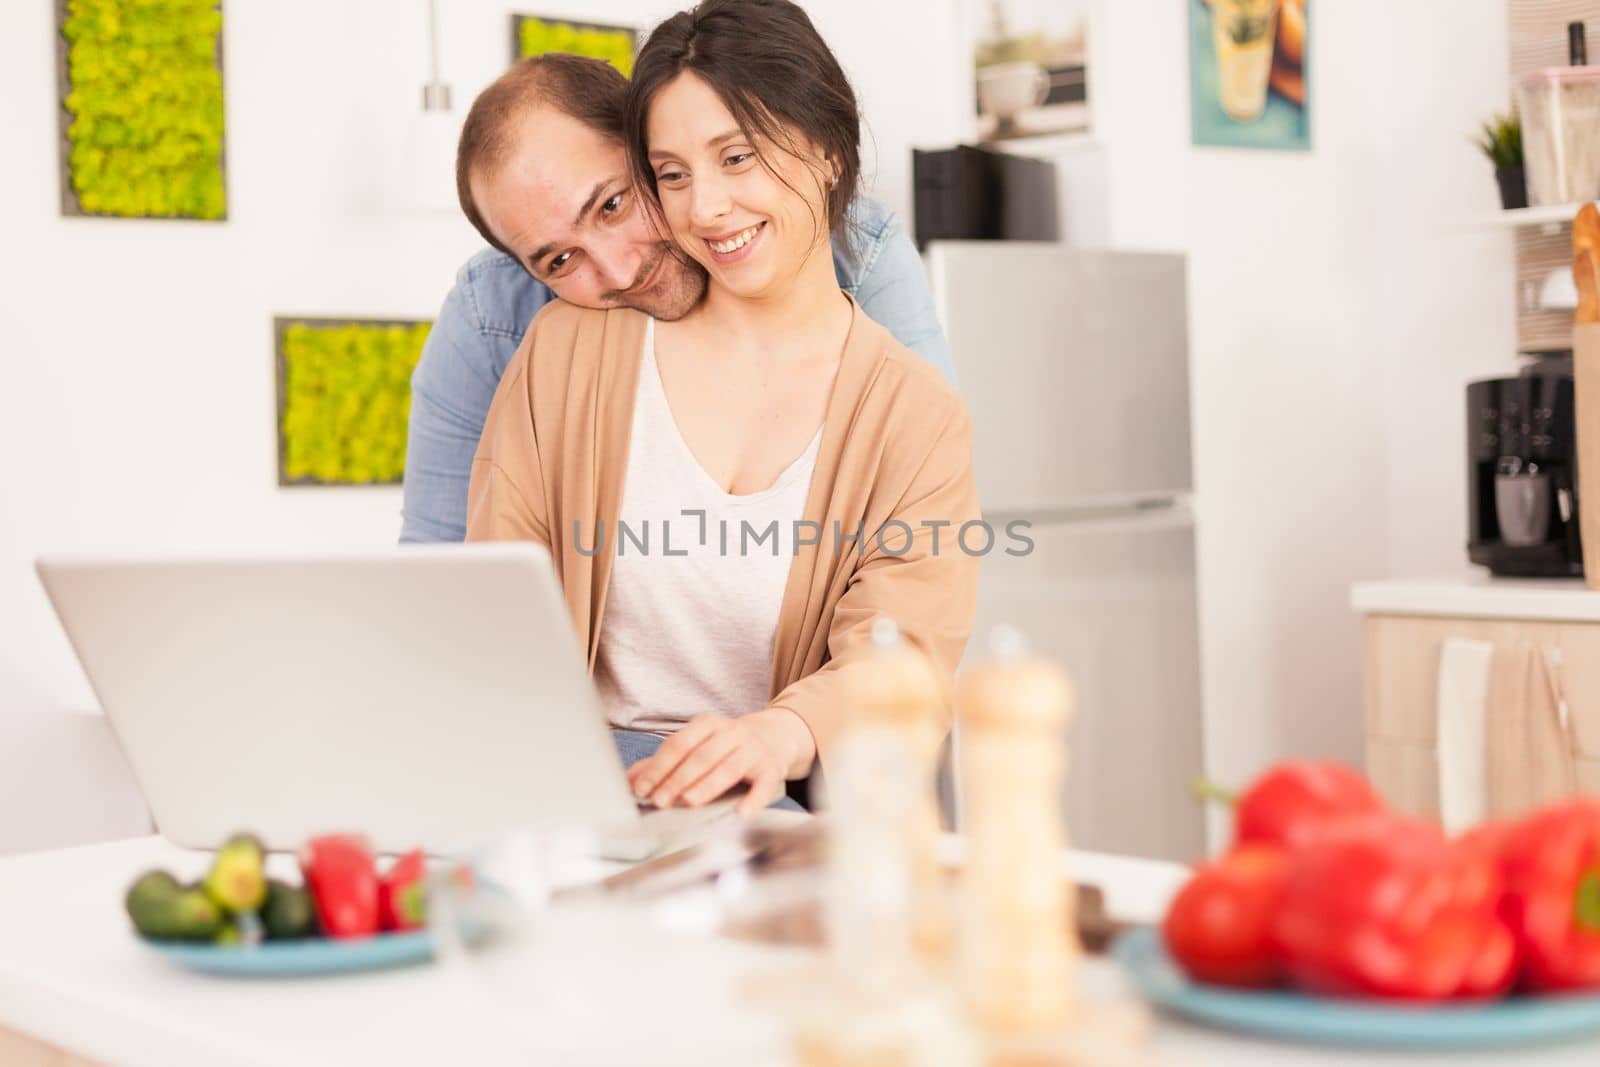 Boyfriend hugs girlfriend in kitchen and she is using laptop. Happy wife. Fresh vegetables. Happy loving cheerful romantic in love couple at home using modern wifi wireless internet technology